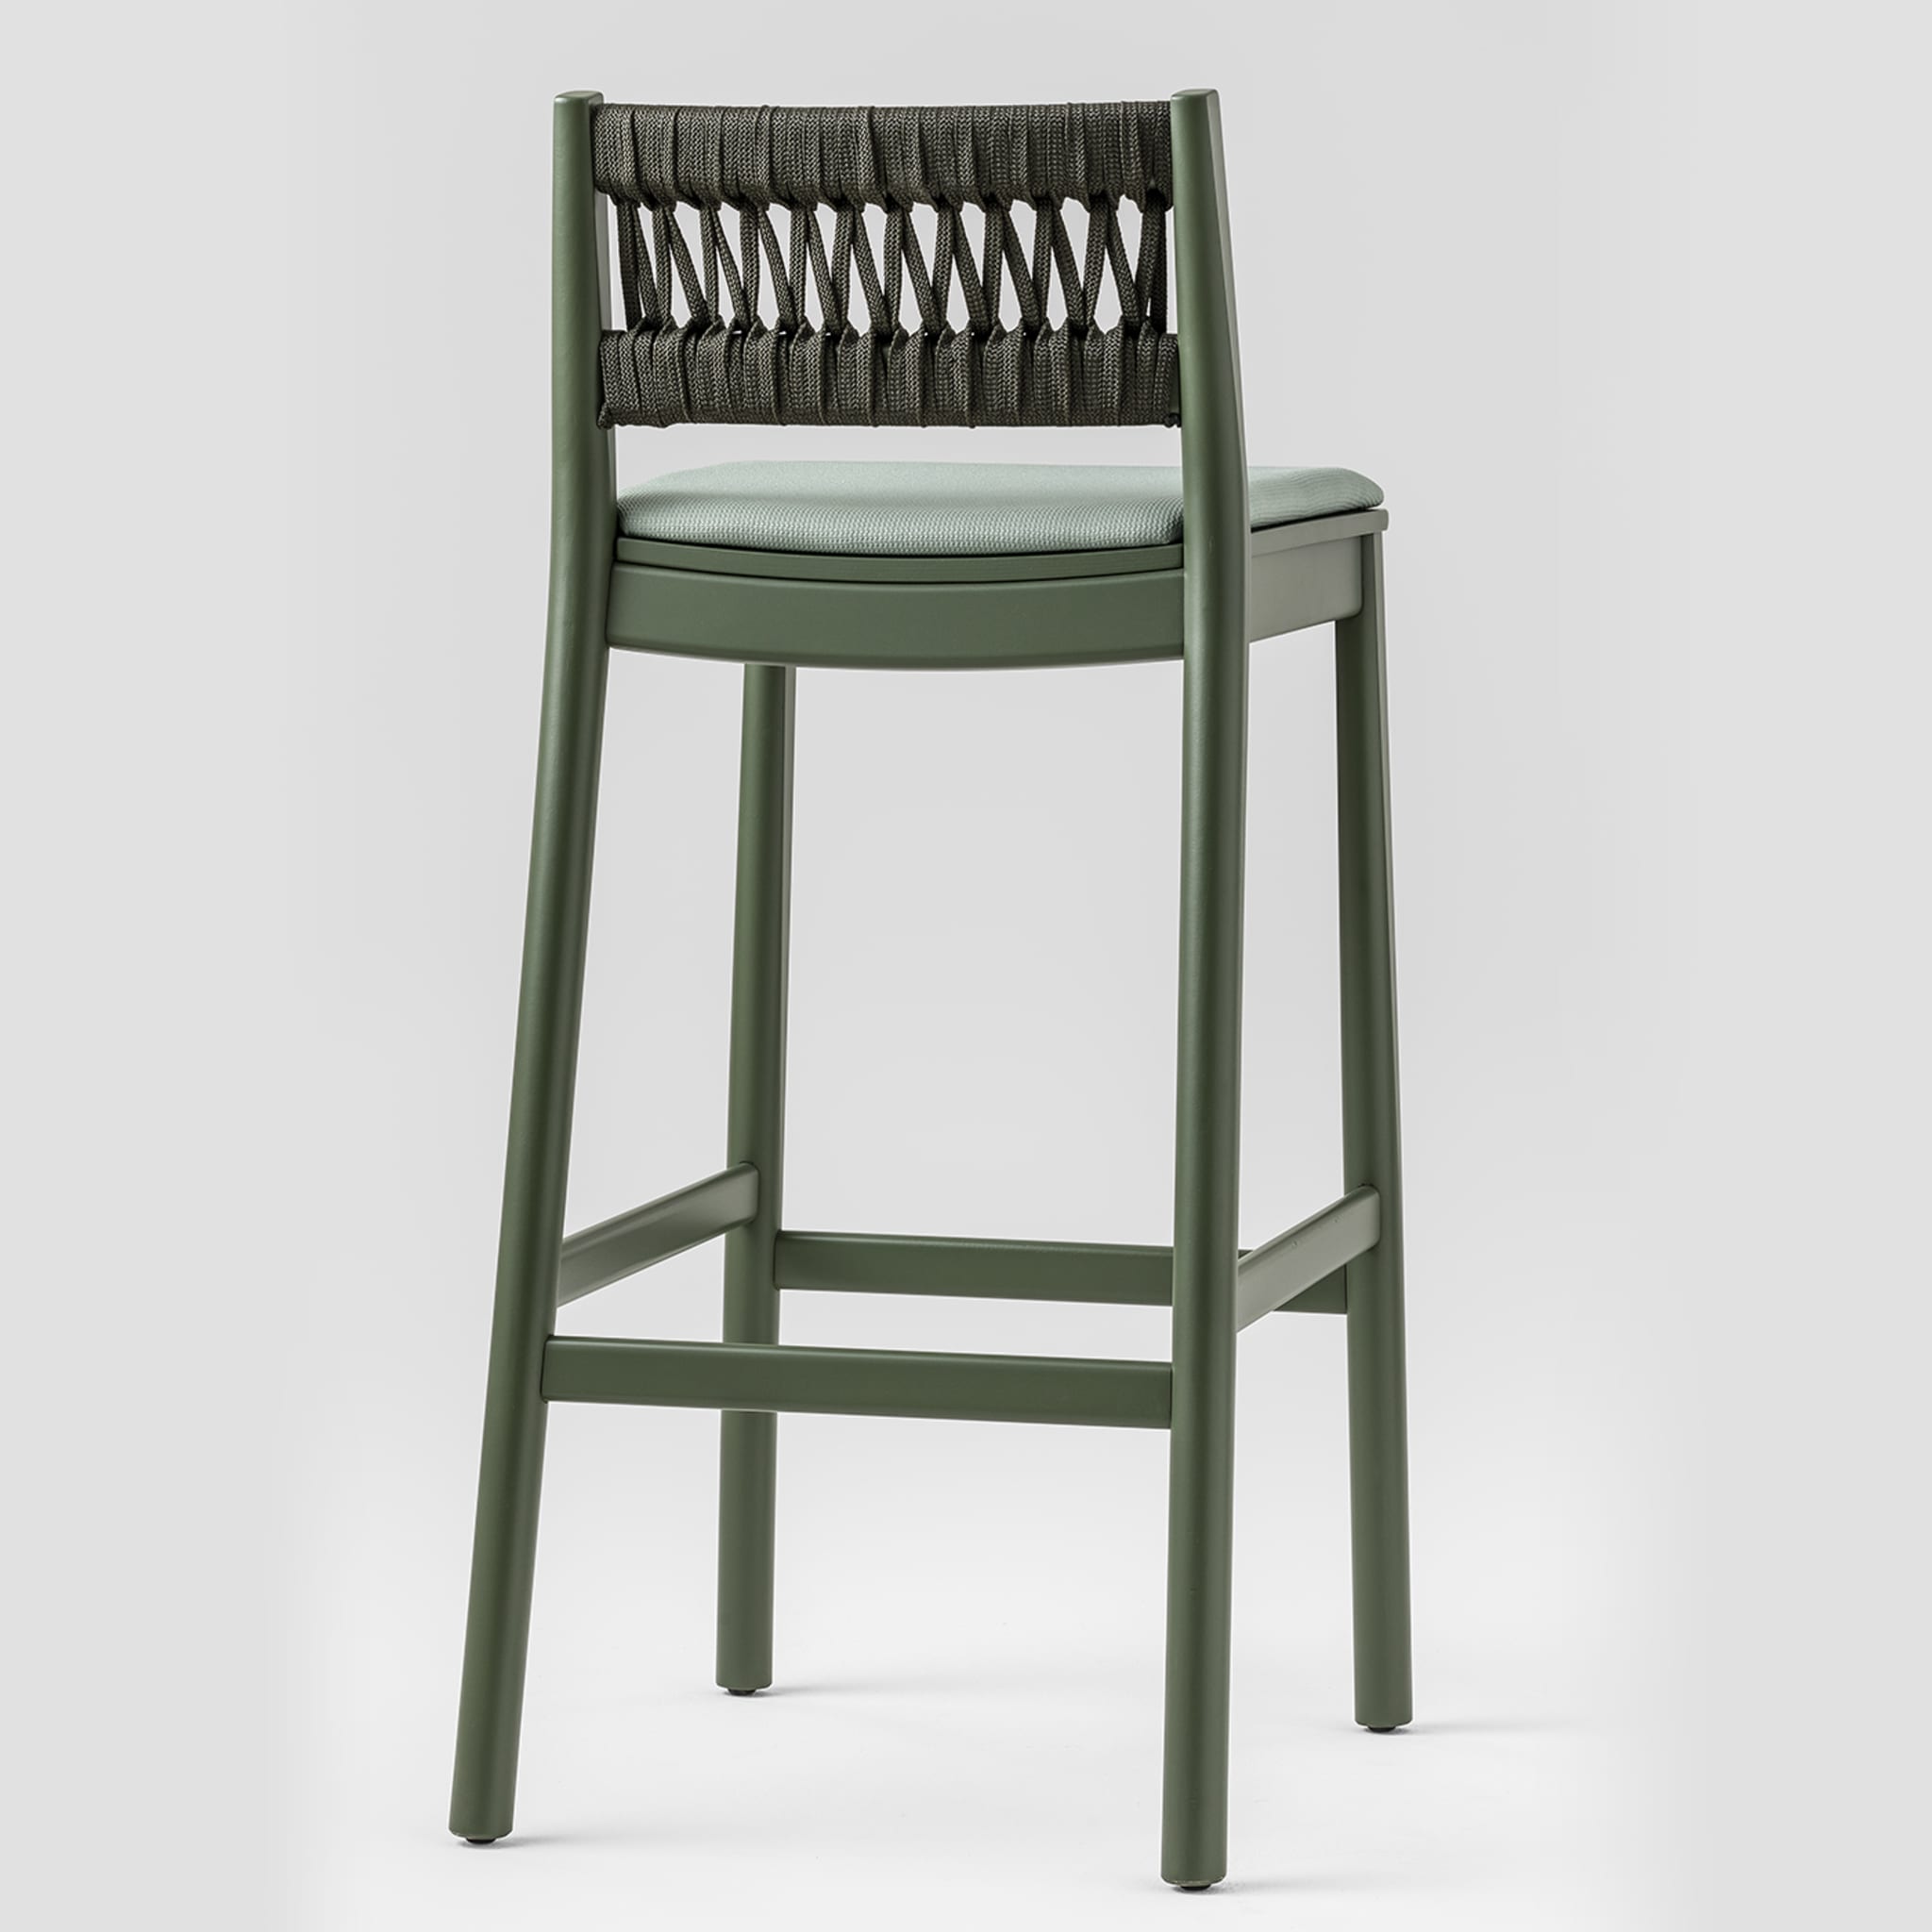 Julie Dark Green Stool with Upholstered Seat by Emilio Nanni - Alternative view 1